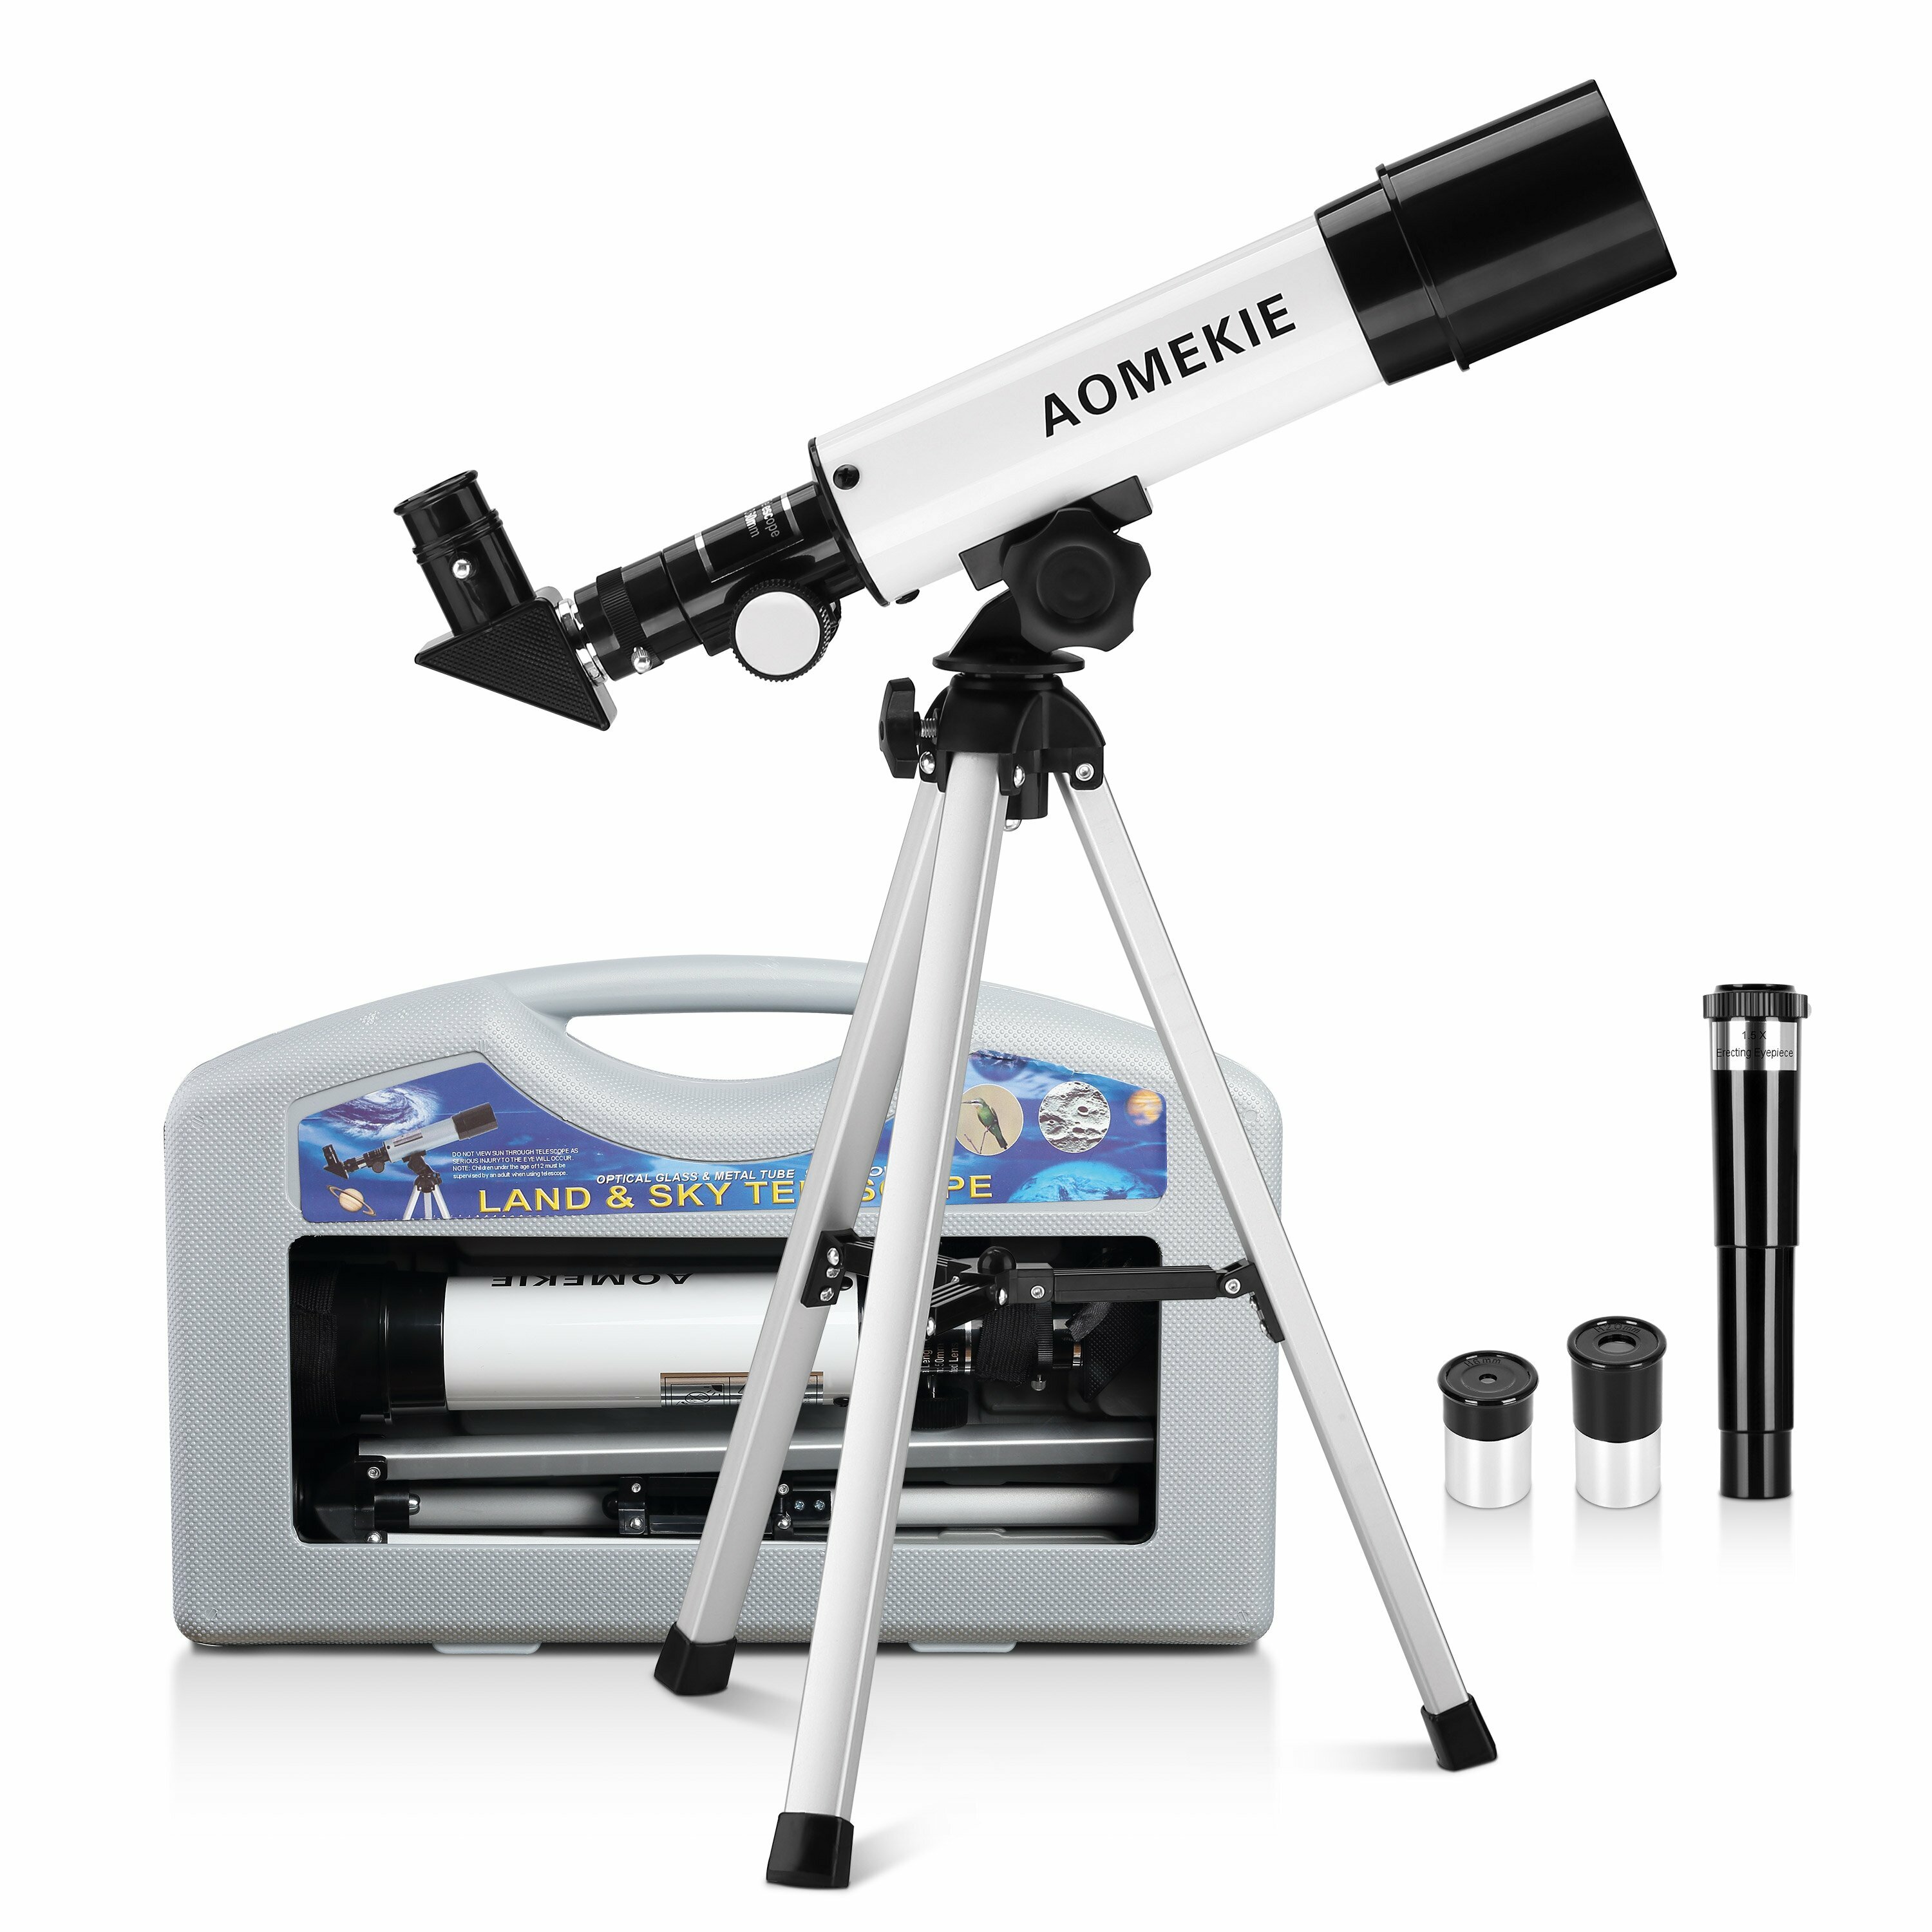 [US Direct] AOMEKIE Astronomical Telescope for Kids 50/360mm Telescope for Astronomy Beginners with Carrying Case Tripod Erecting Eyepiece Refractor Telescope AO2008